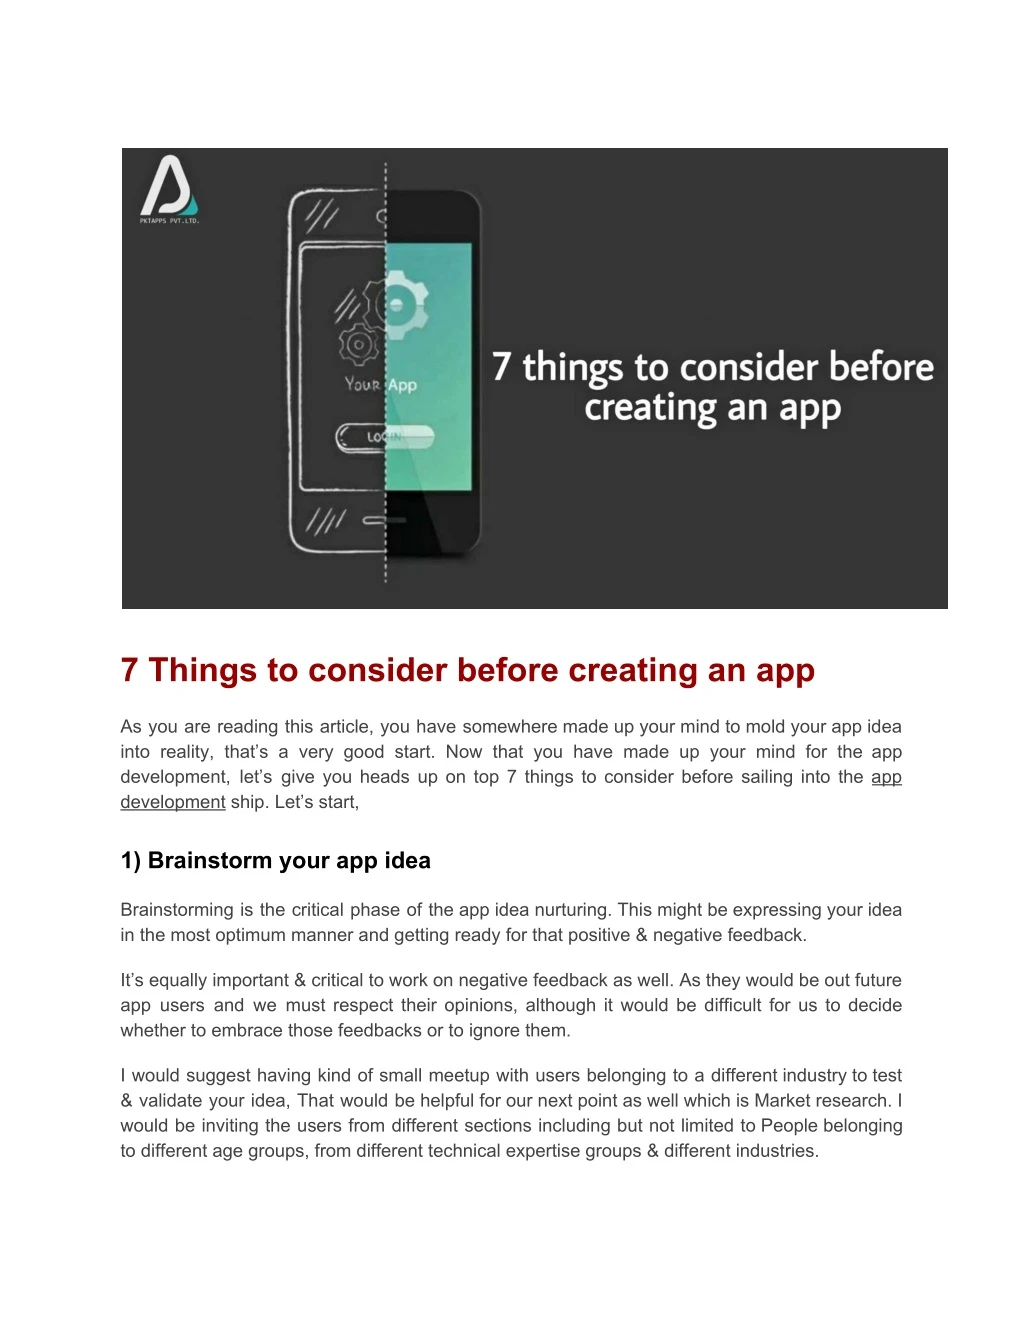 7 things to consider before creating an app